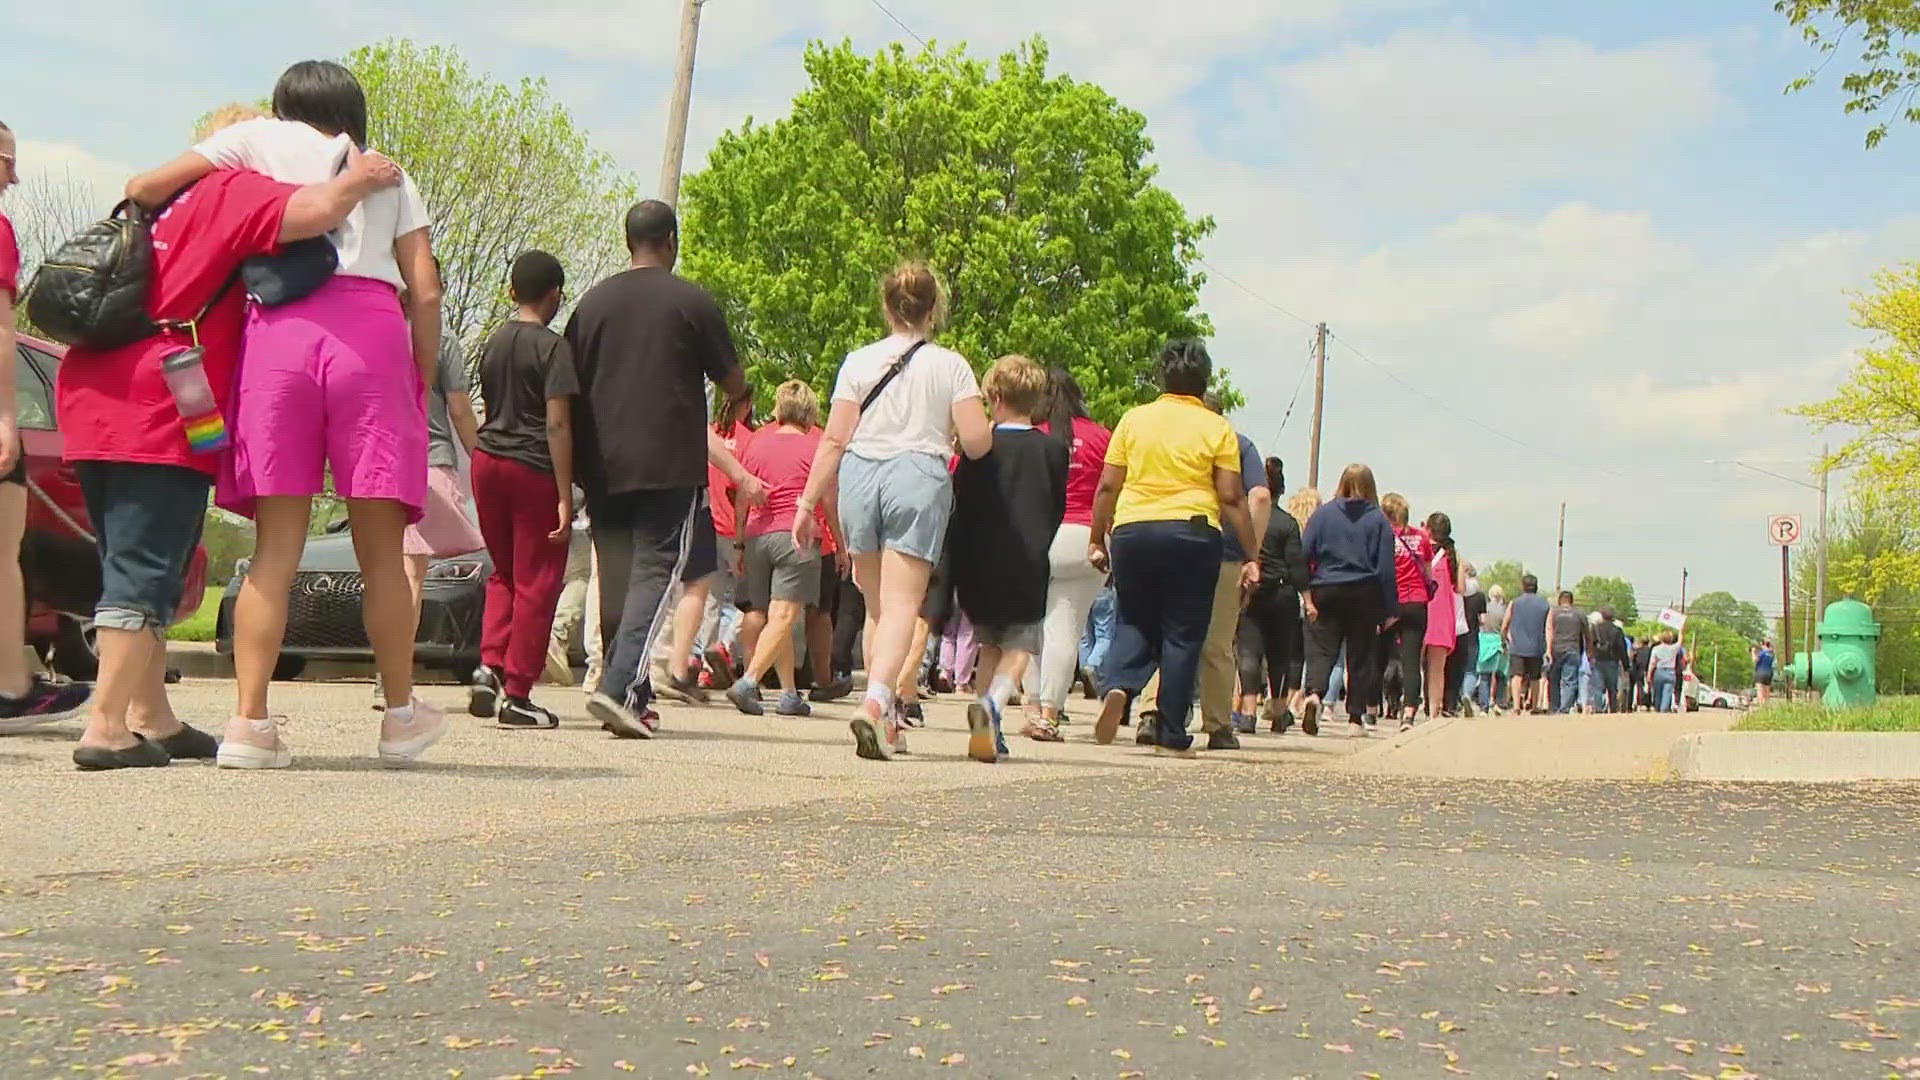 The group hosted the walk in honor of National Youth Violence Prevention Week.